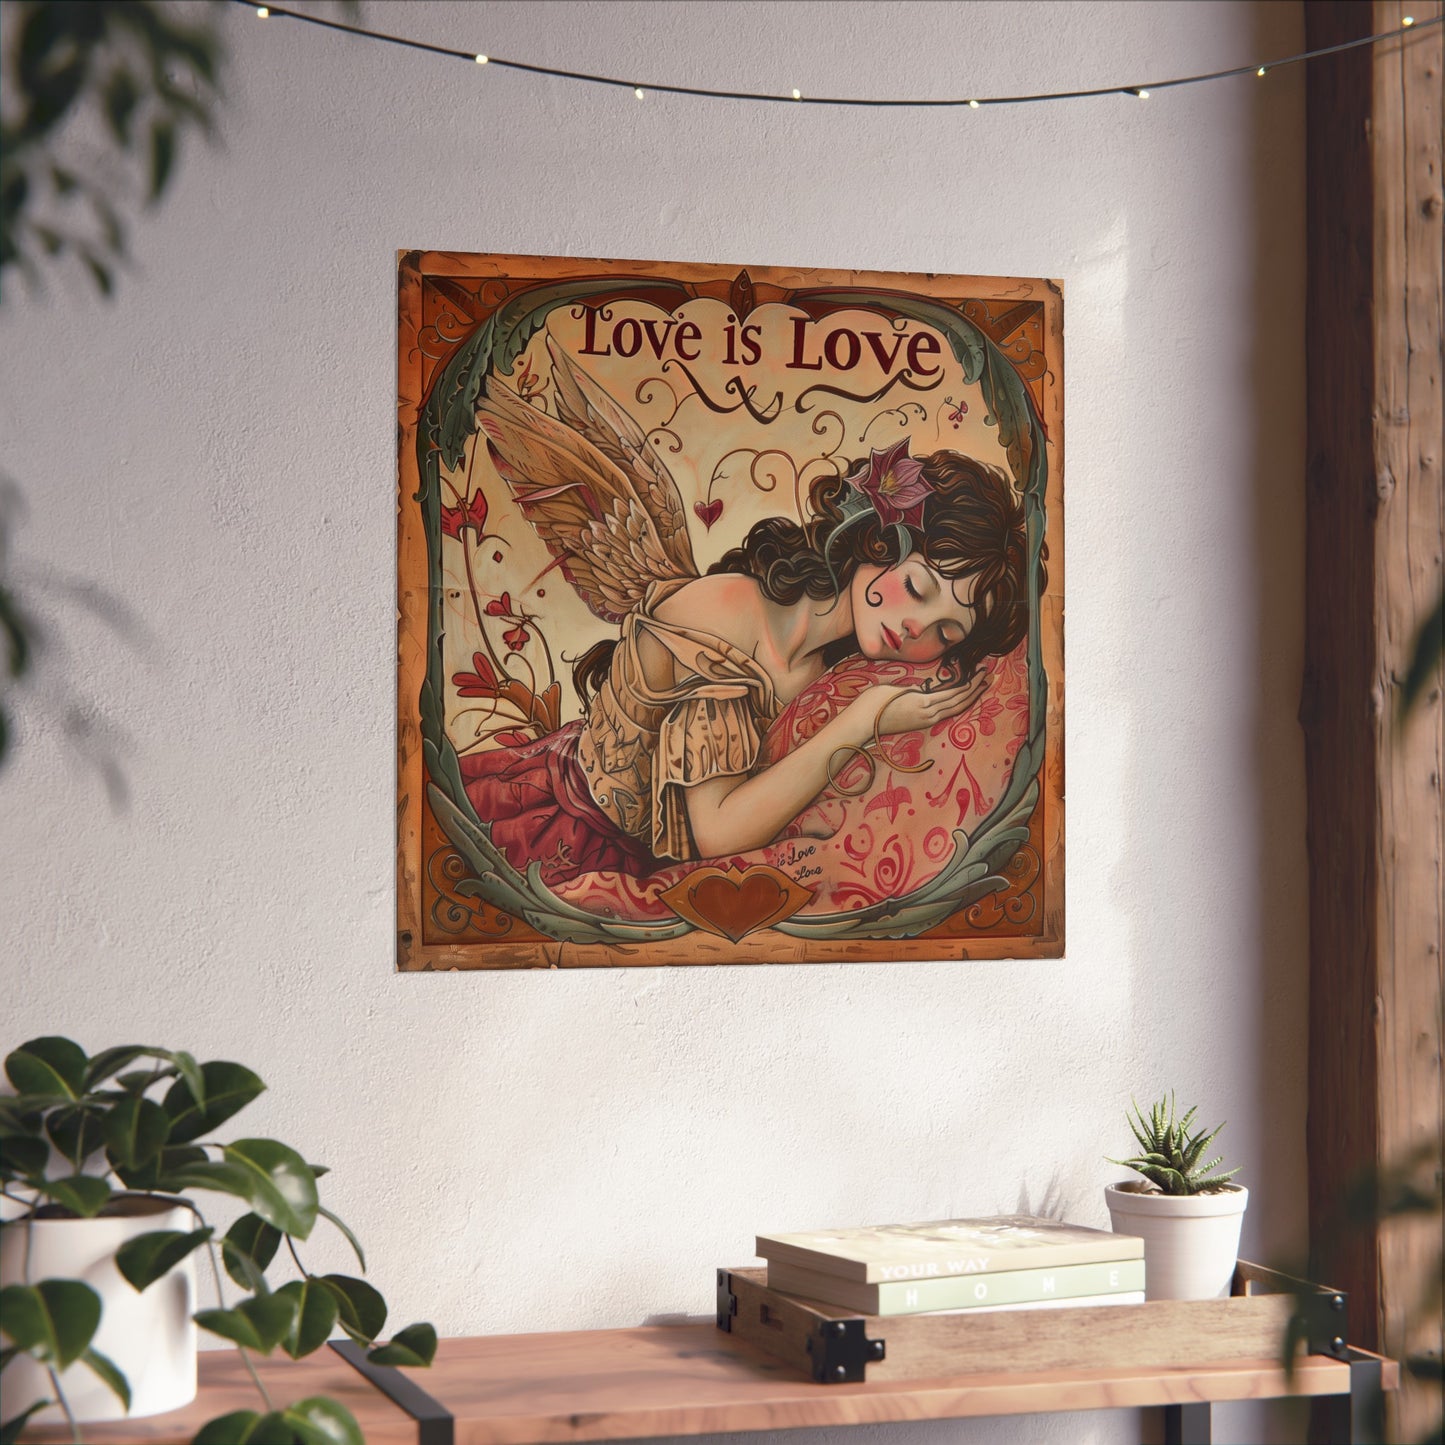 Love is Love Matte Poster Pride Statement Wall Art for Home Office or Dorm Decor Fairy Love Too!